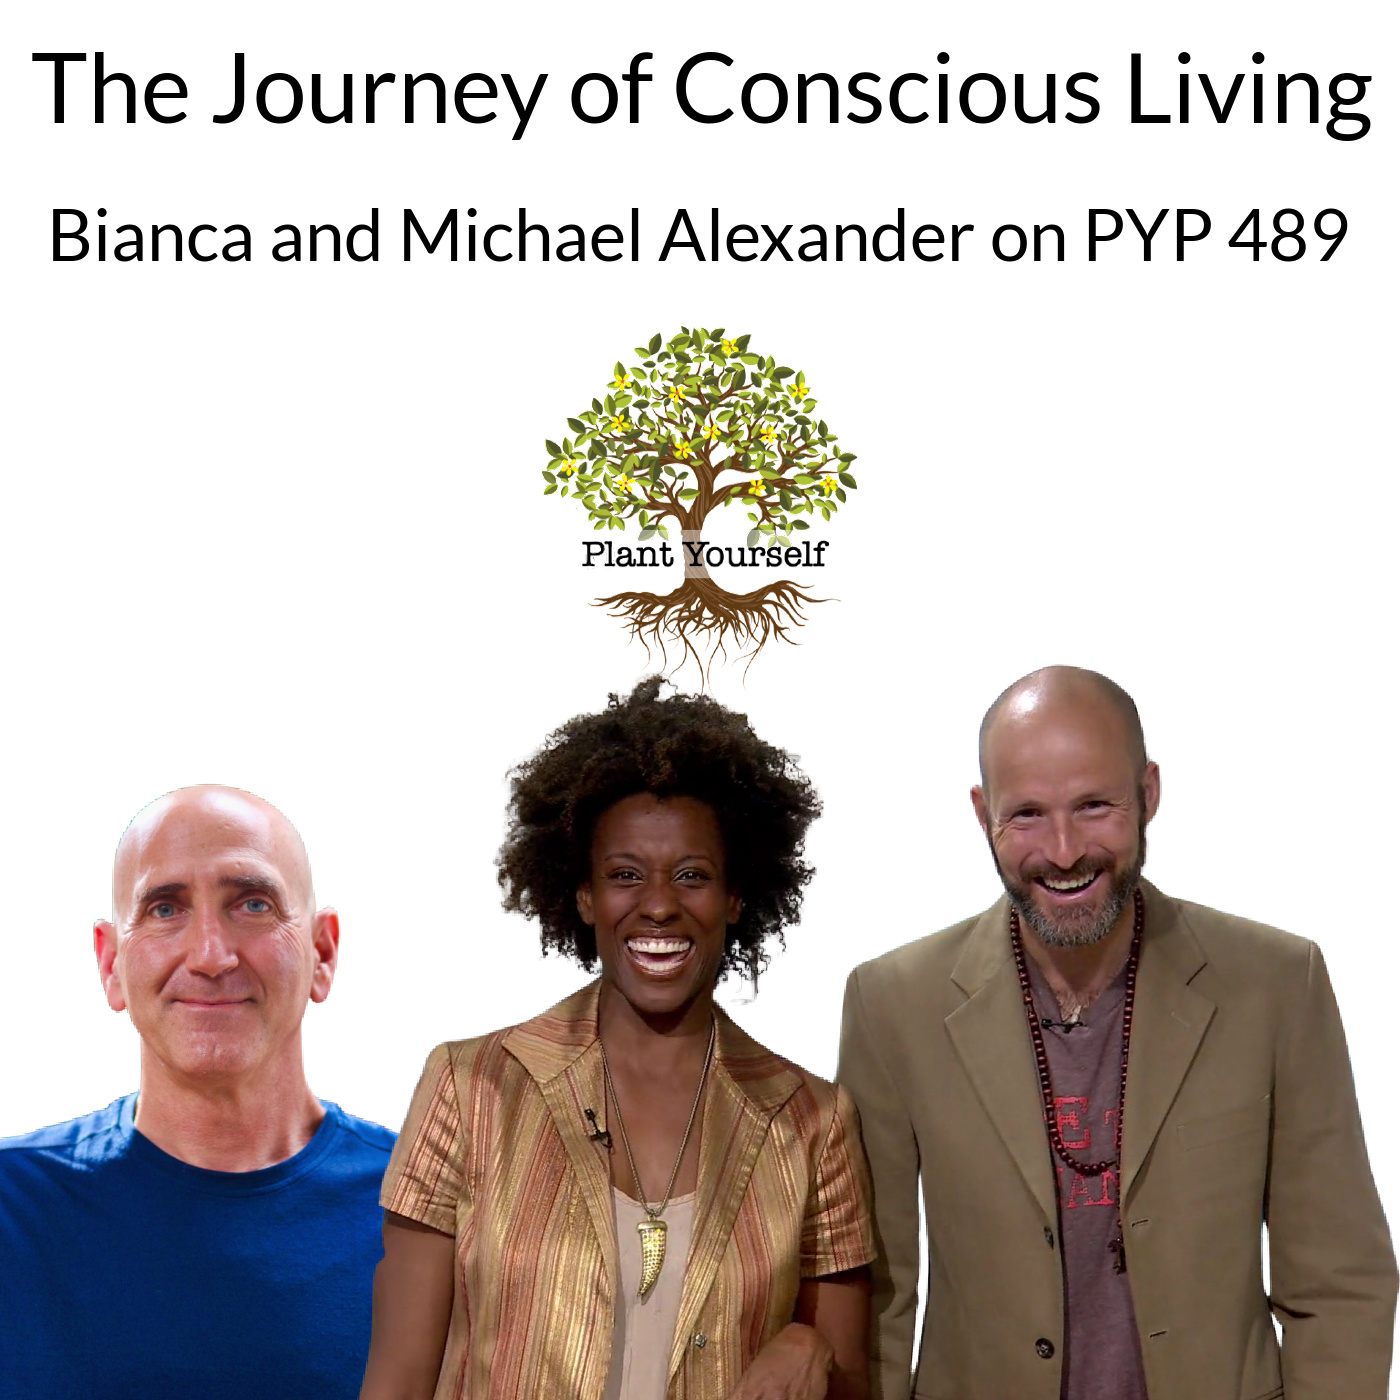 The Journey of Conscious Living: Bianca and Michael Alexander on Plant Yourself 489